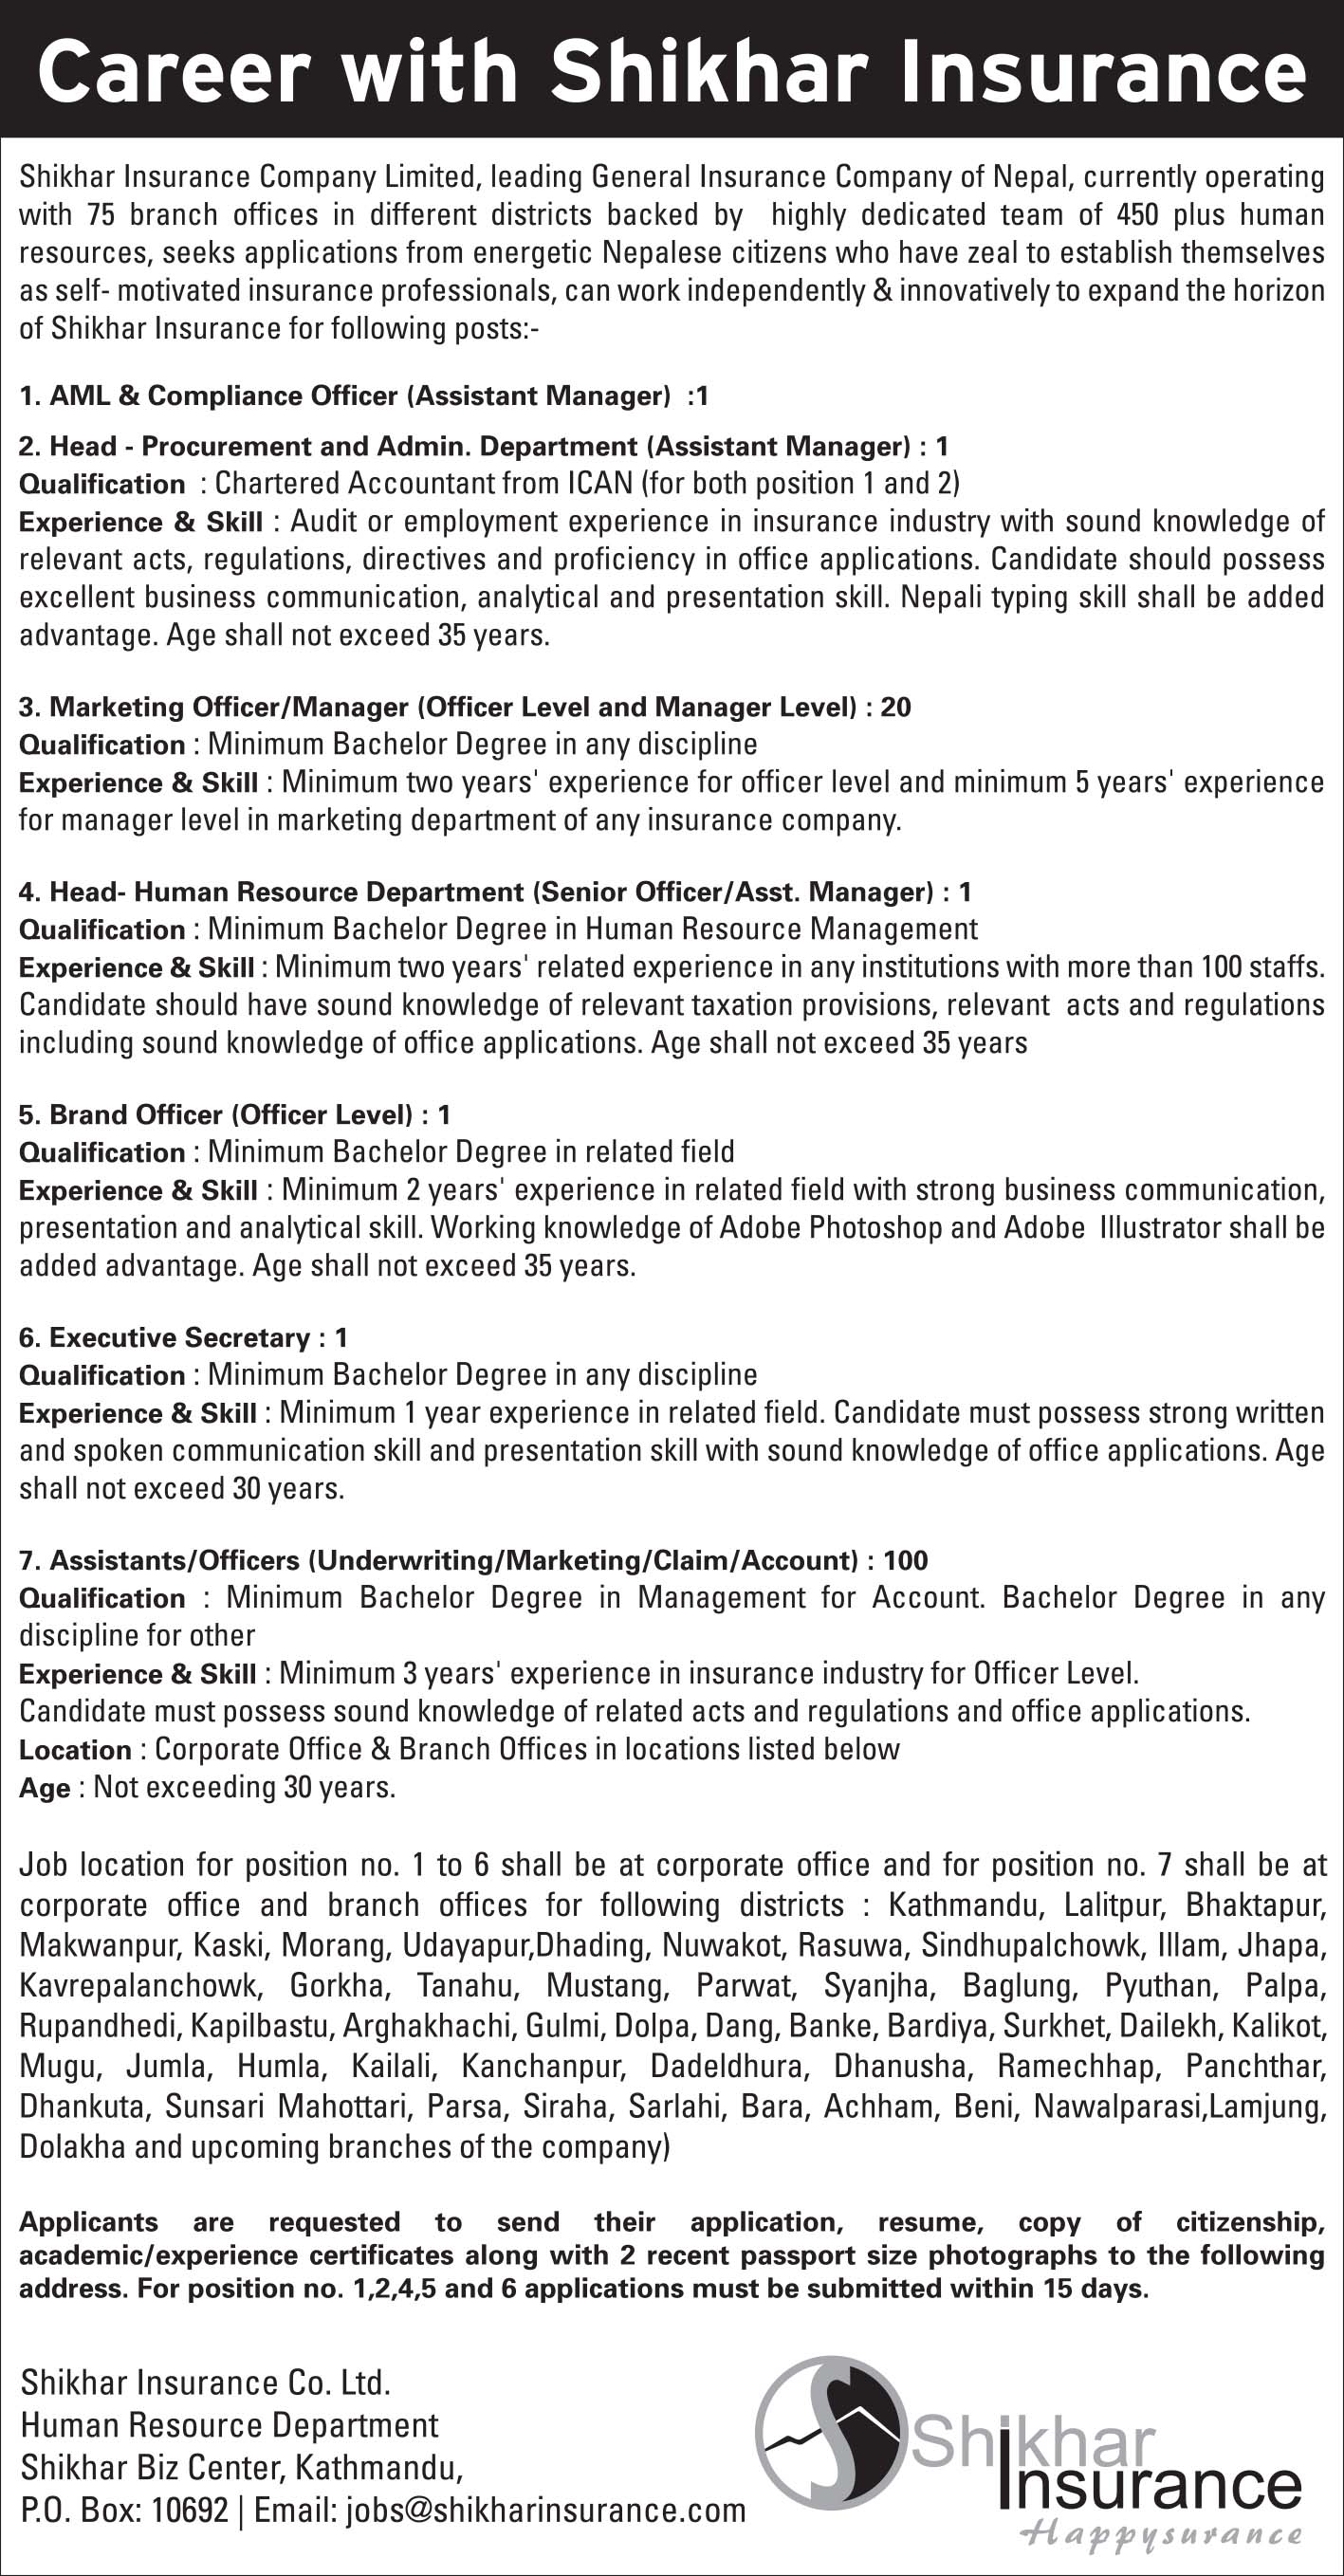 vacancy-published-in-the-himalayan-times-daily